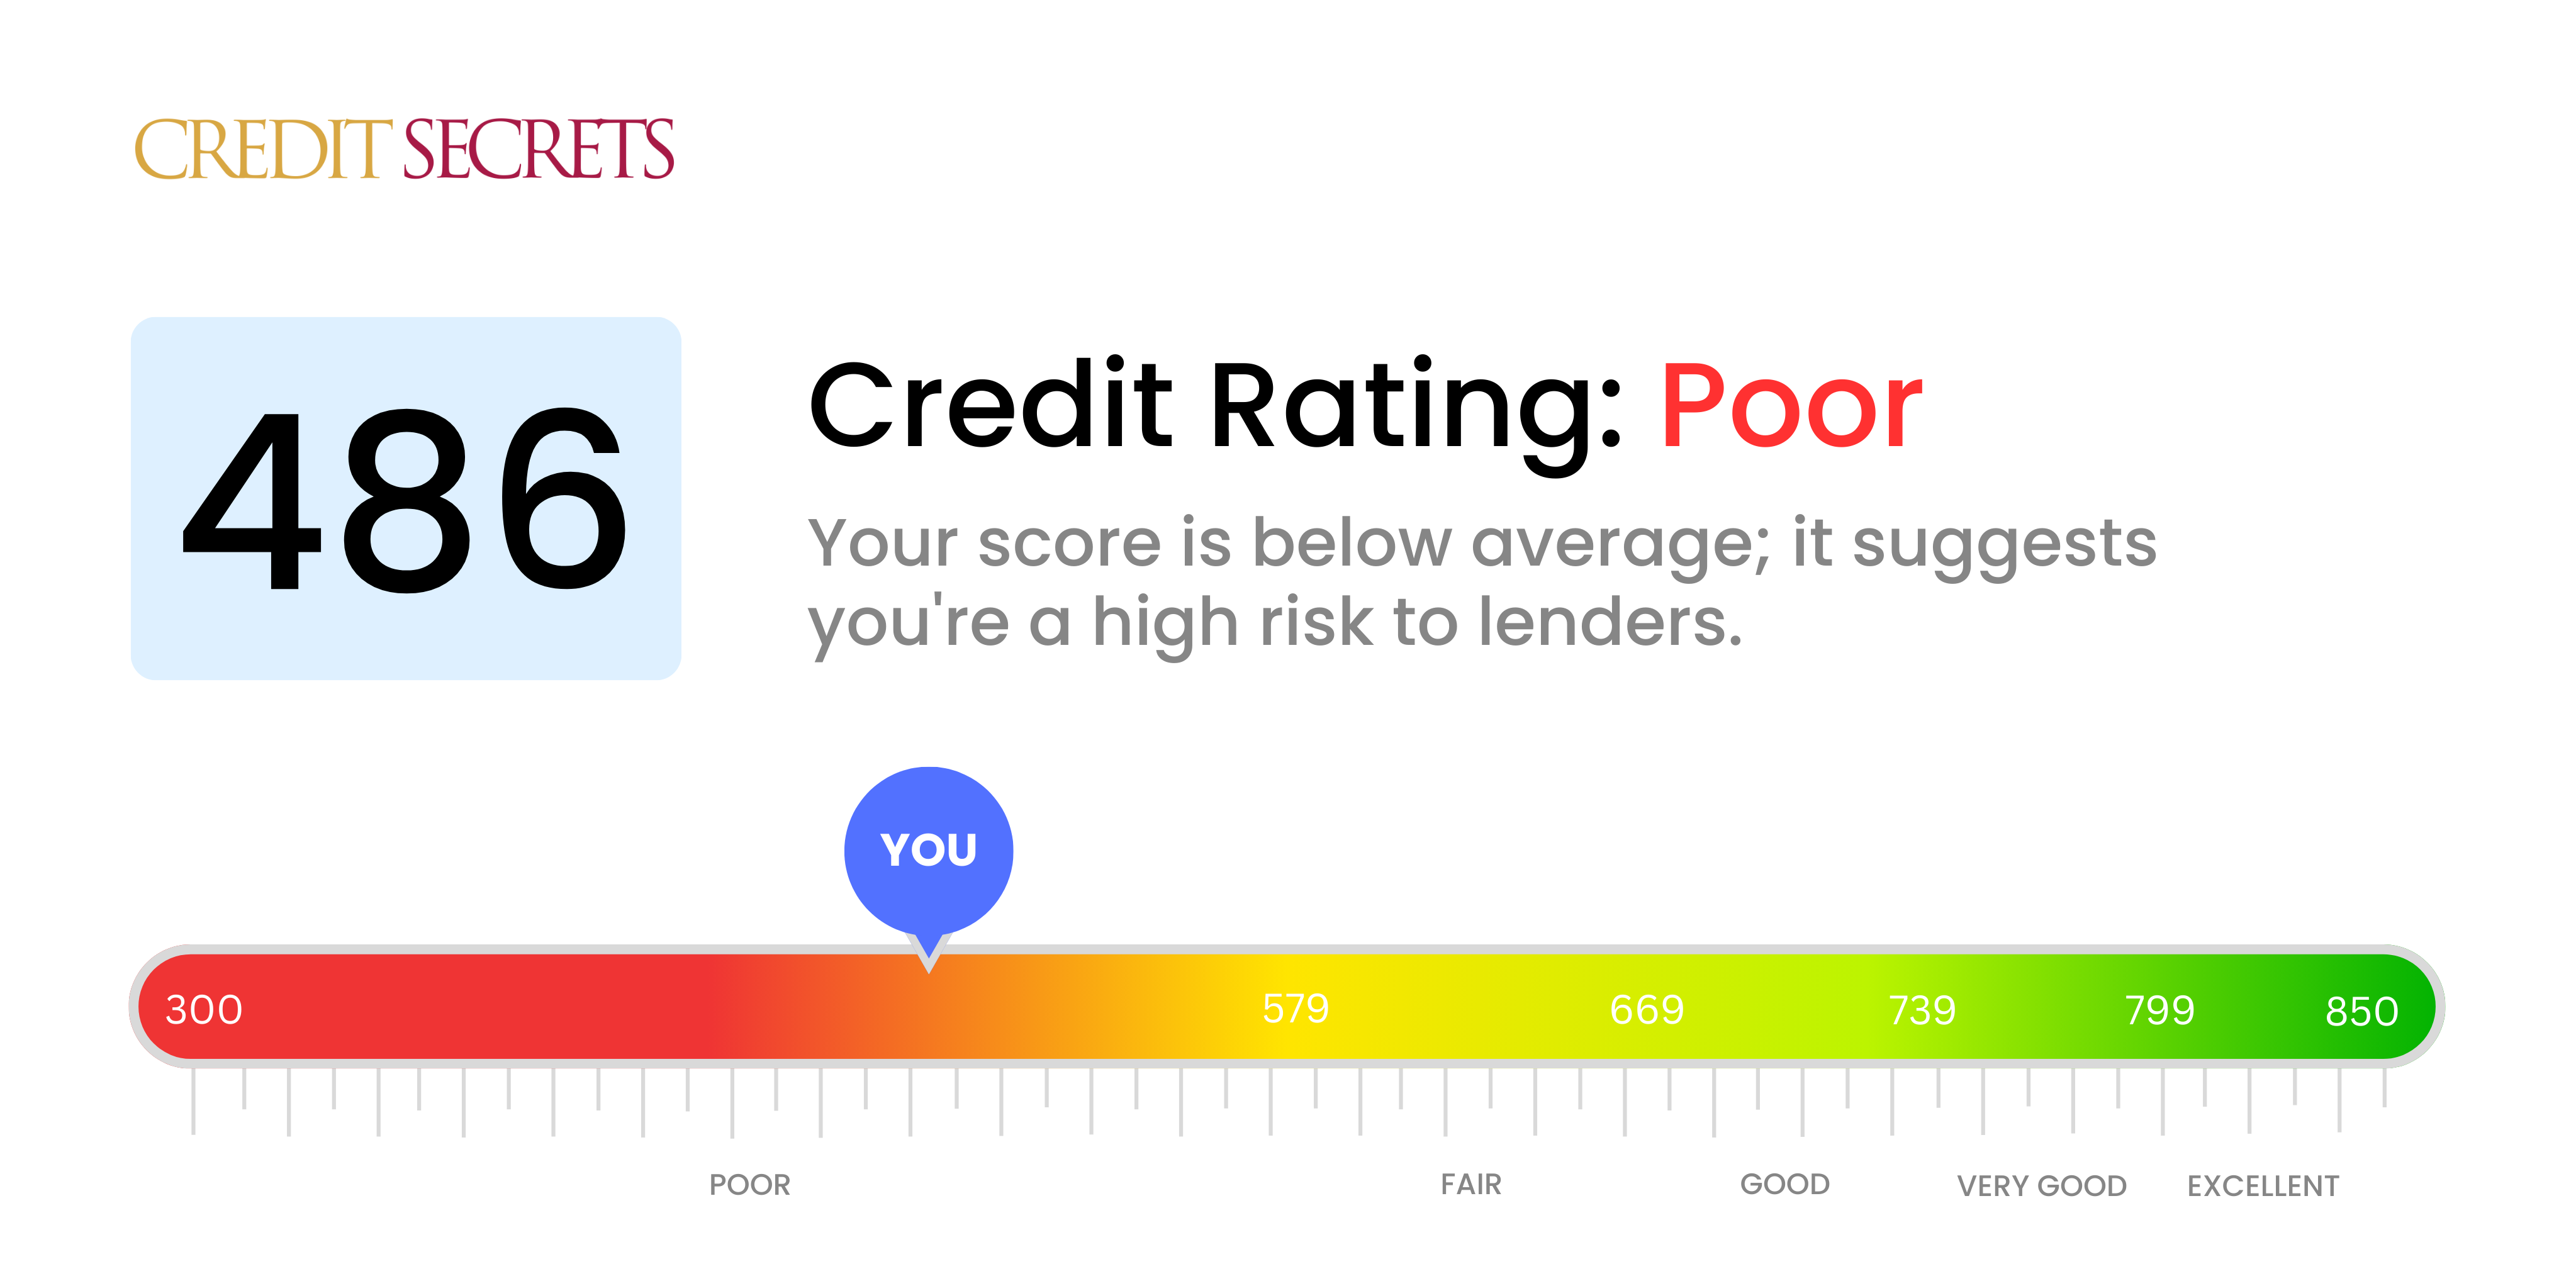 Is 486 a good credit score?